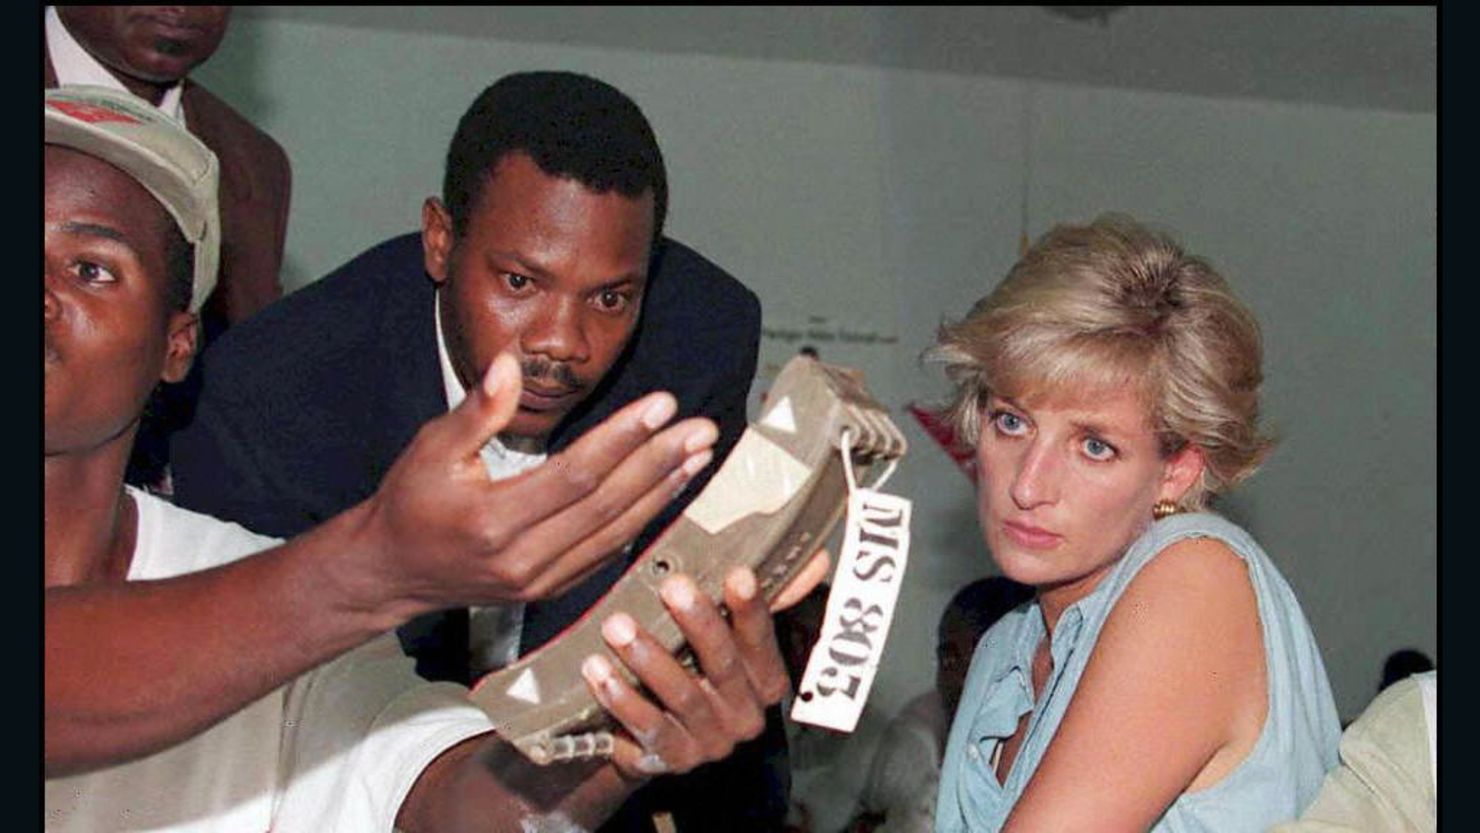 Prince Harry's mother Princess Diana visited Angola in 1997 in support of the campaign to ban anti-personnel landmines.